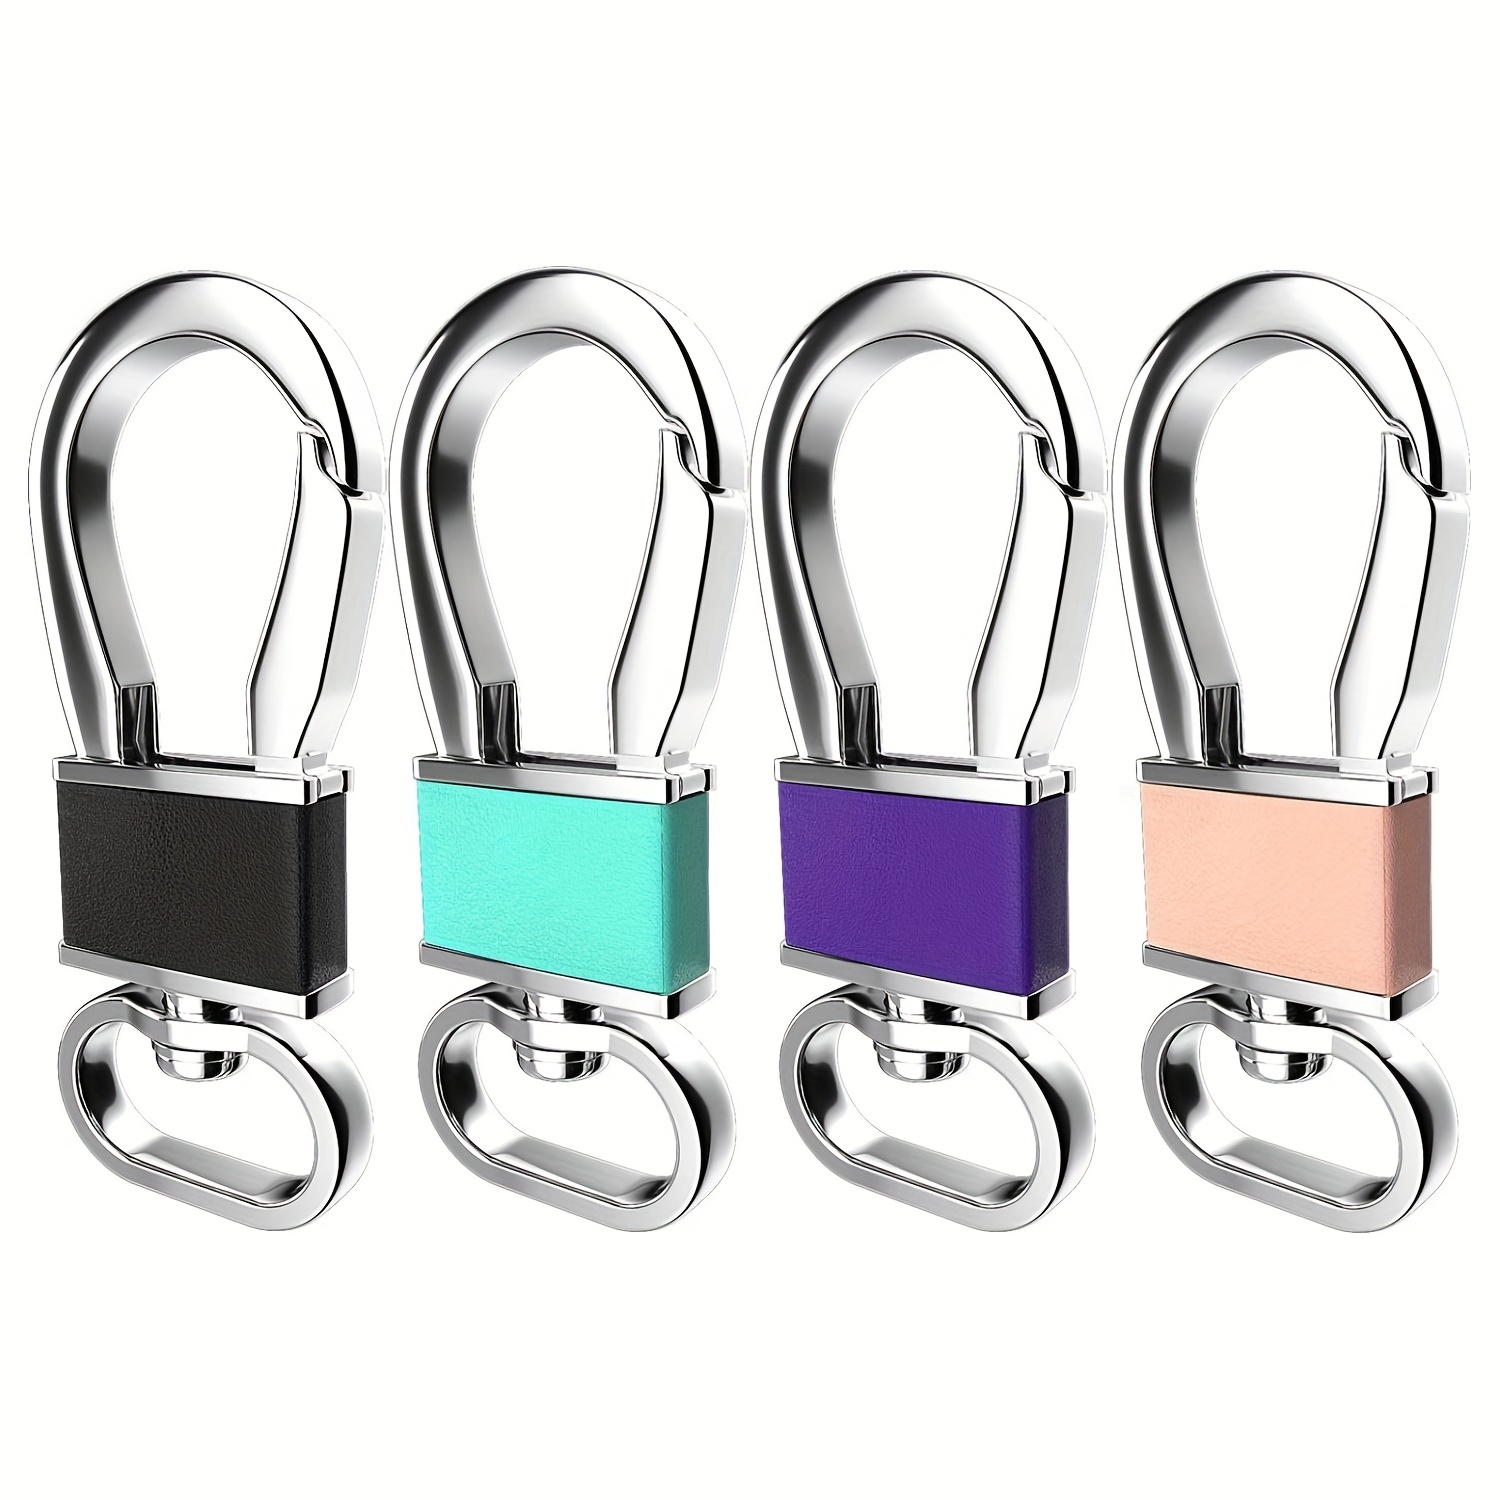 TIESOME 4 PCS Metal Keychain Carabiner Clip Keyring Key Ring Chain Clips  Hook Holder Organizer Keychain Clasps Key Chain Key Ring for Car Key Men